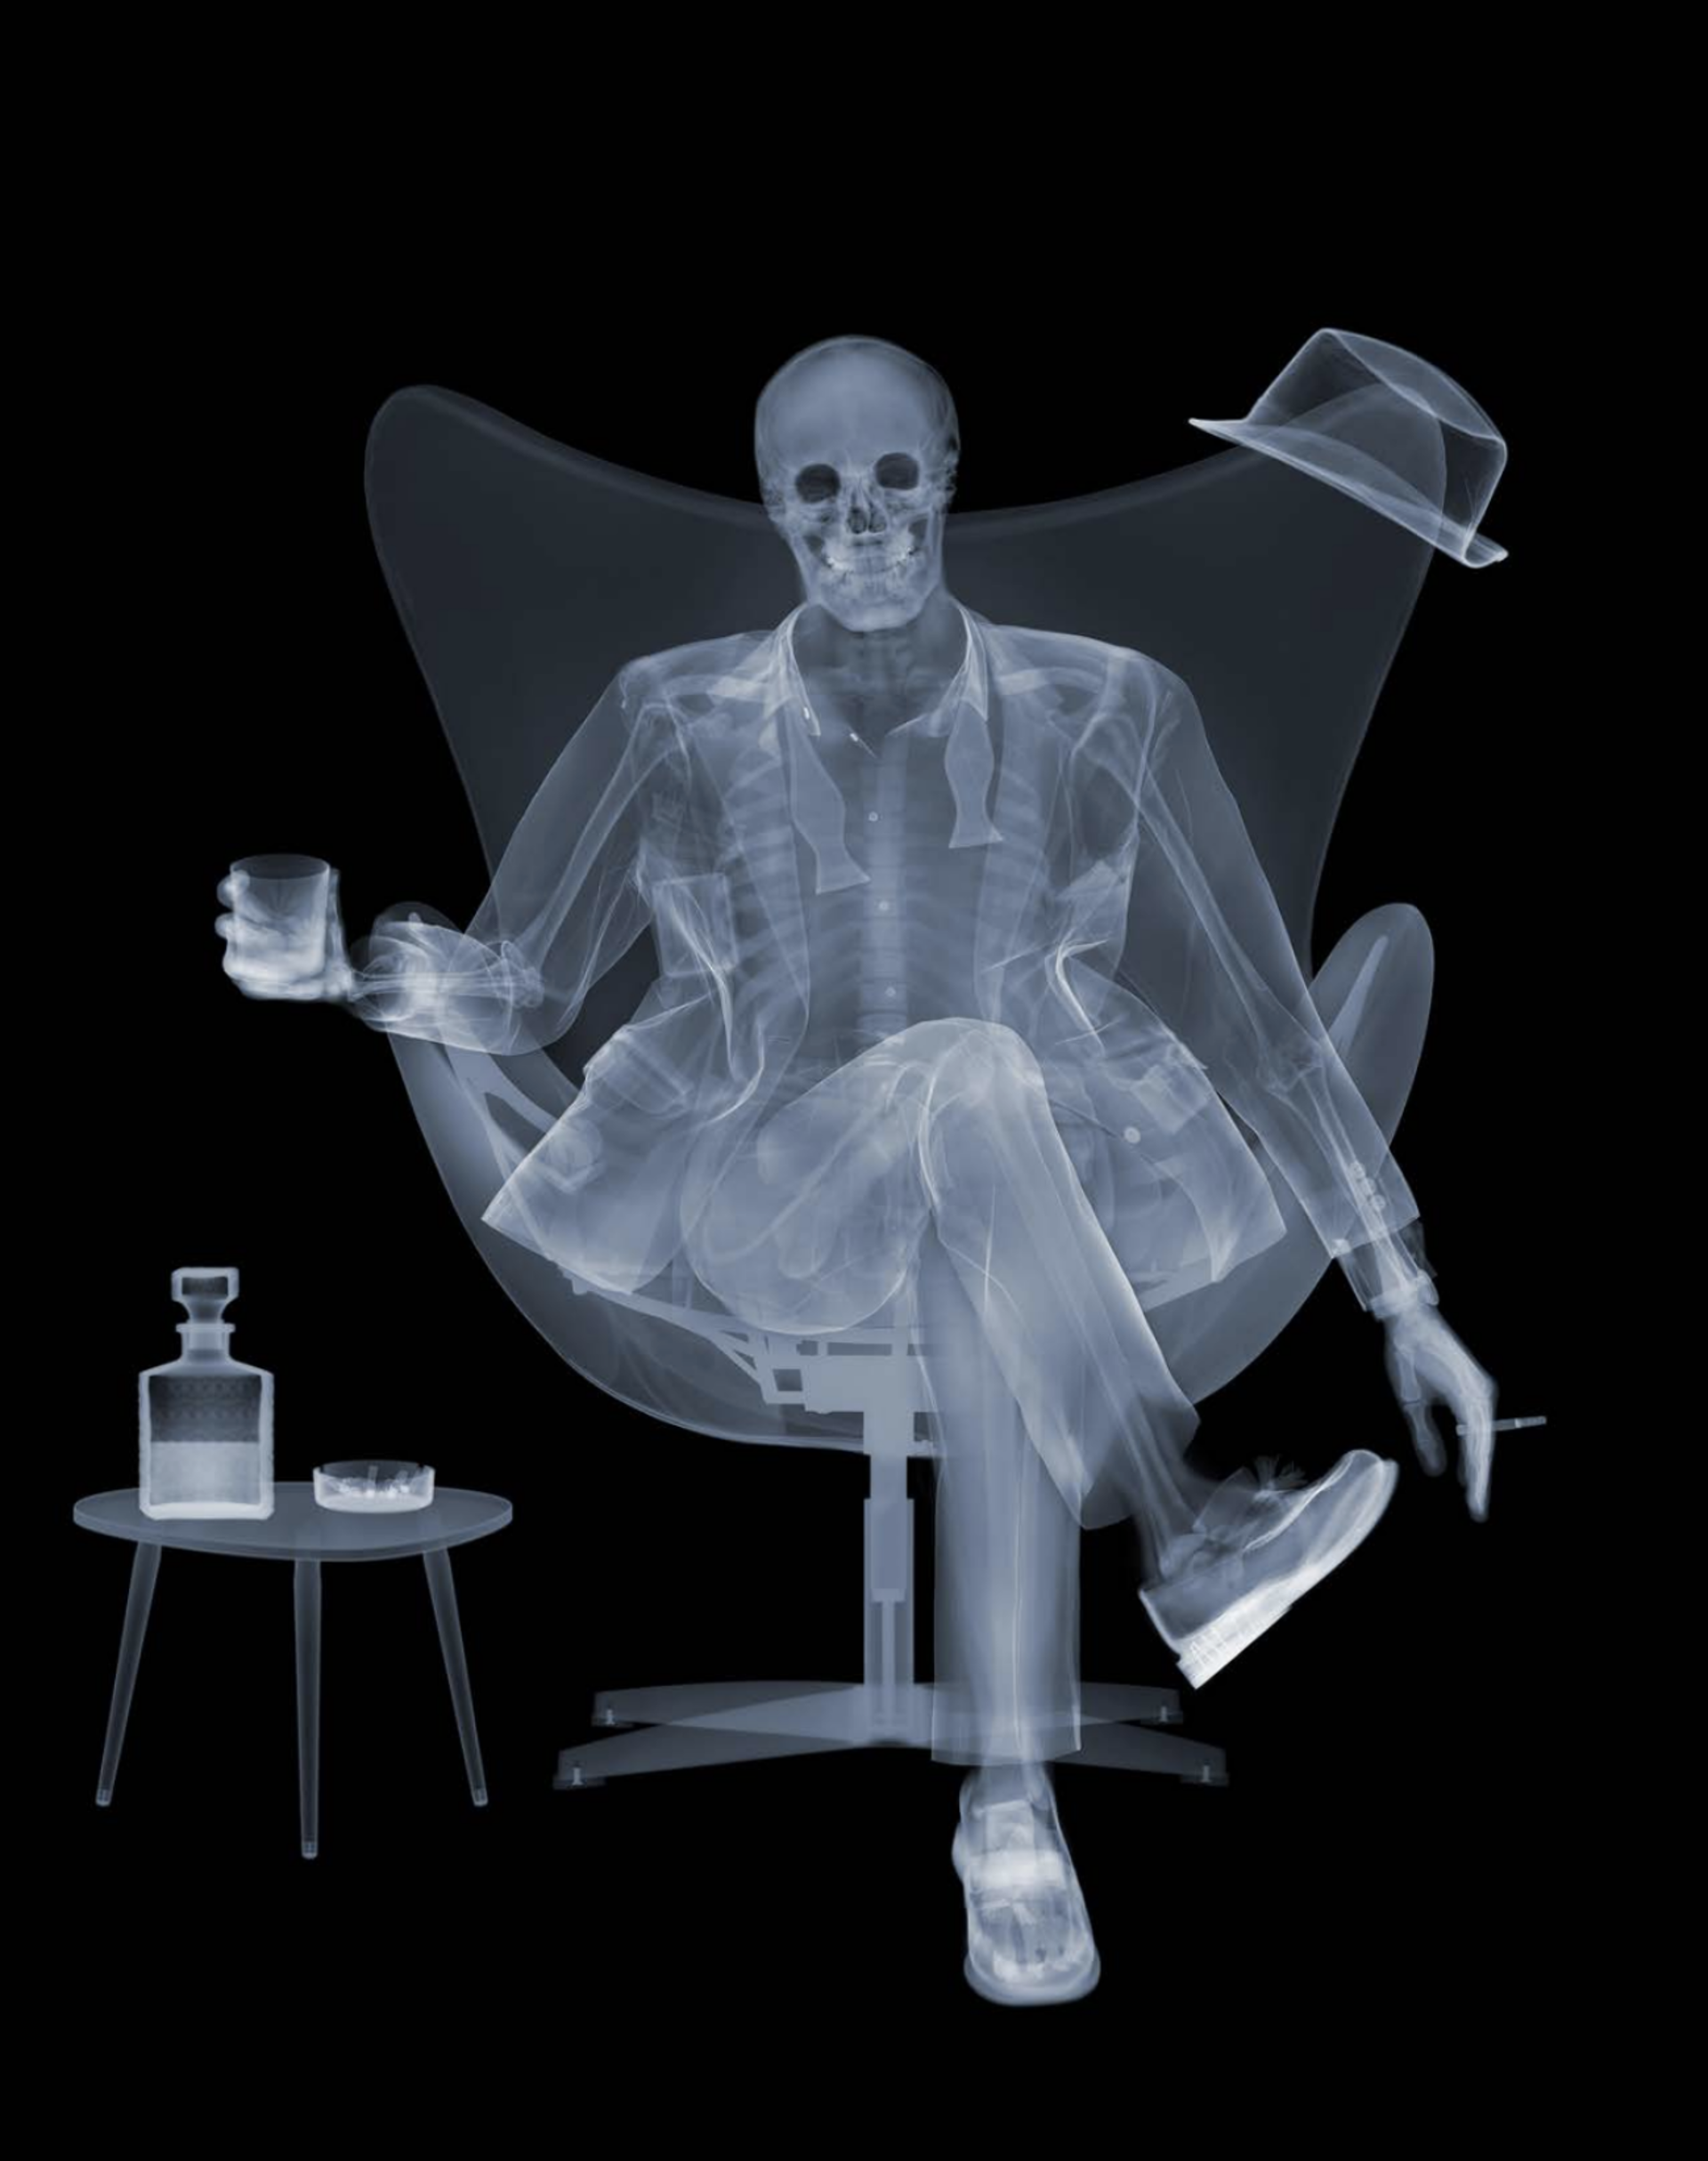 Rat Pack III by Nick Veasey